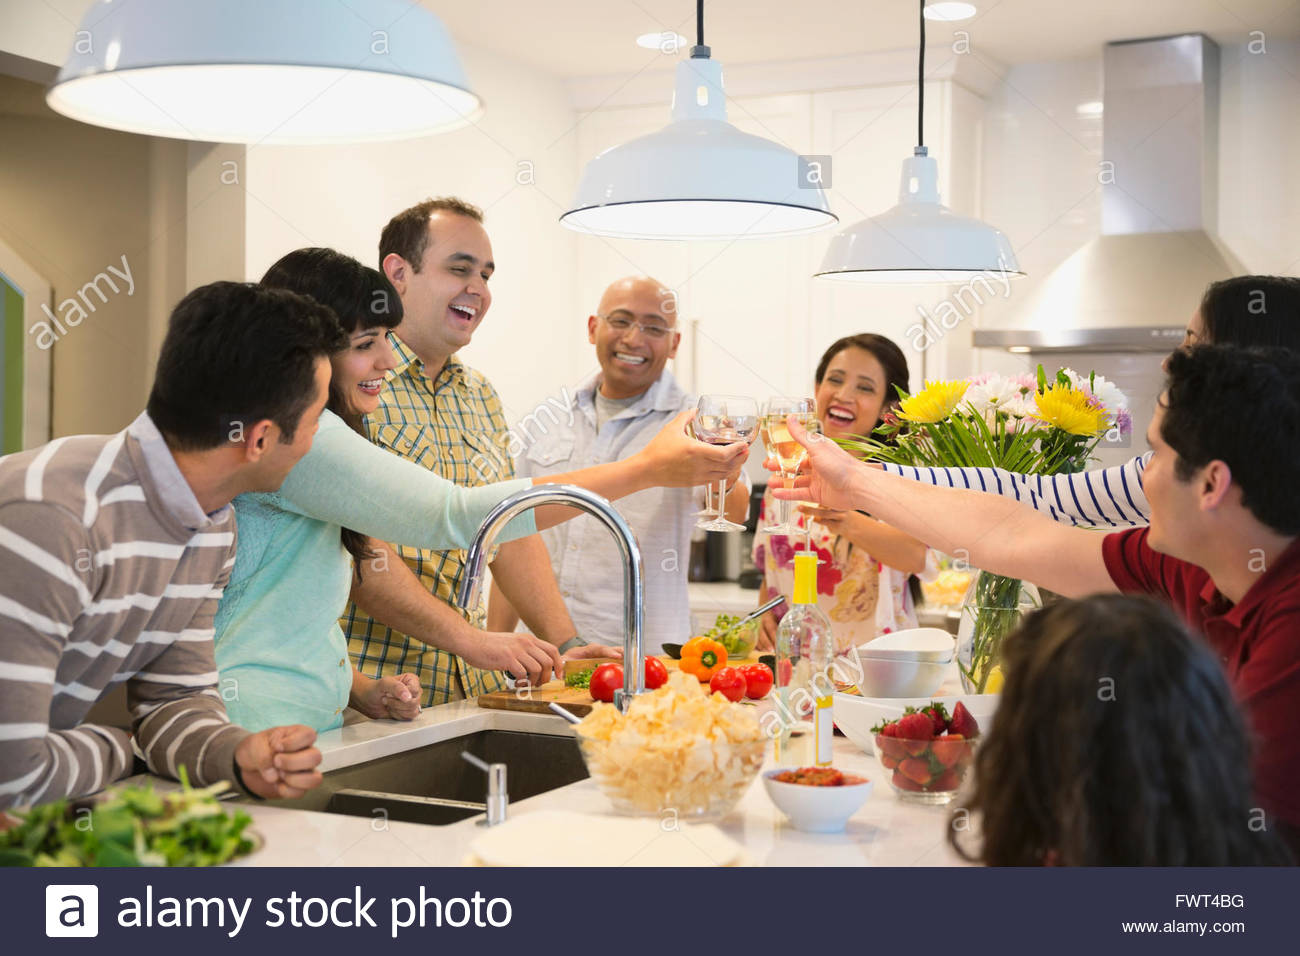 Friends Toasting in Kitchen Stock Photo